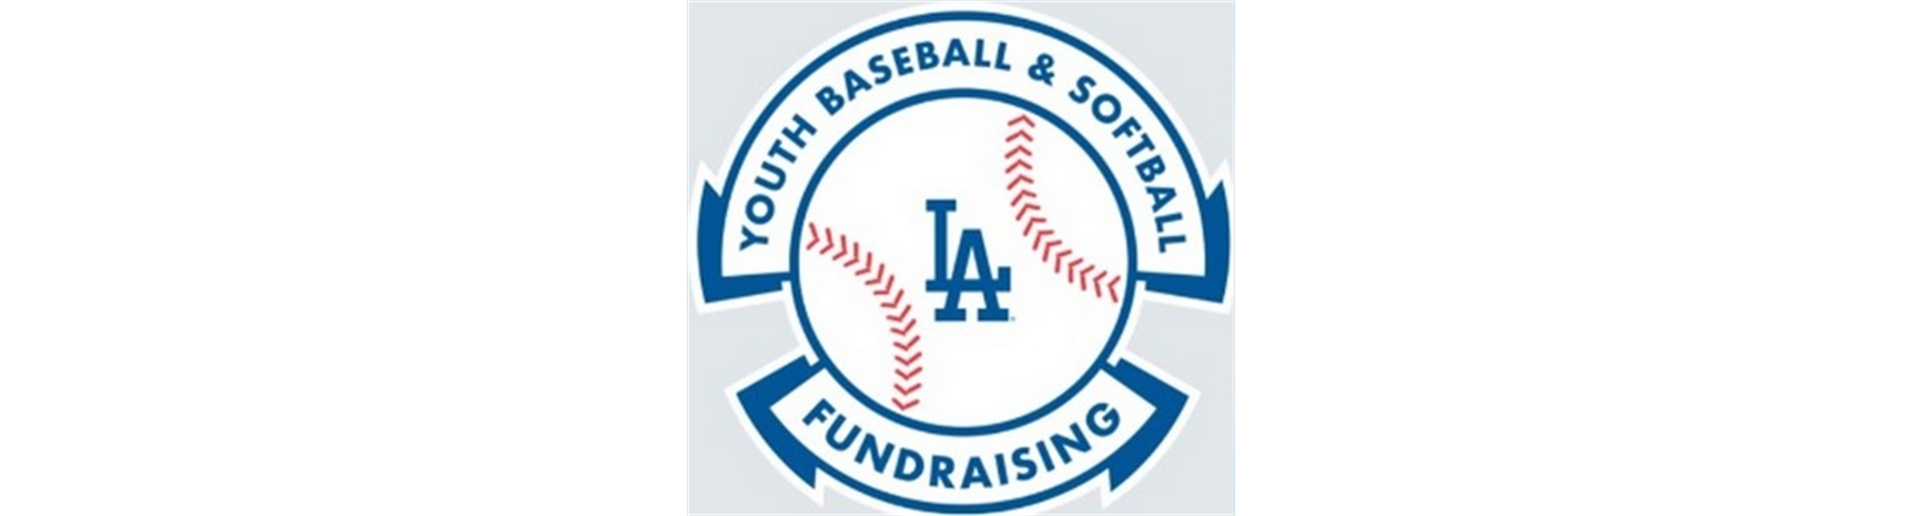 Buy Dodger Tickets & Help TCALL!!!